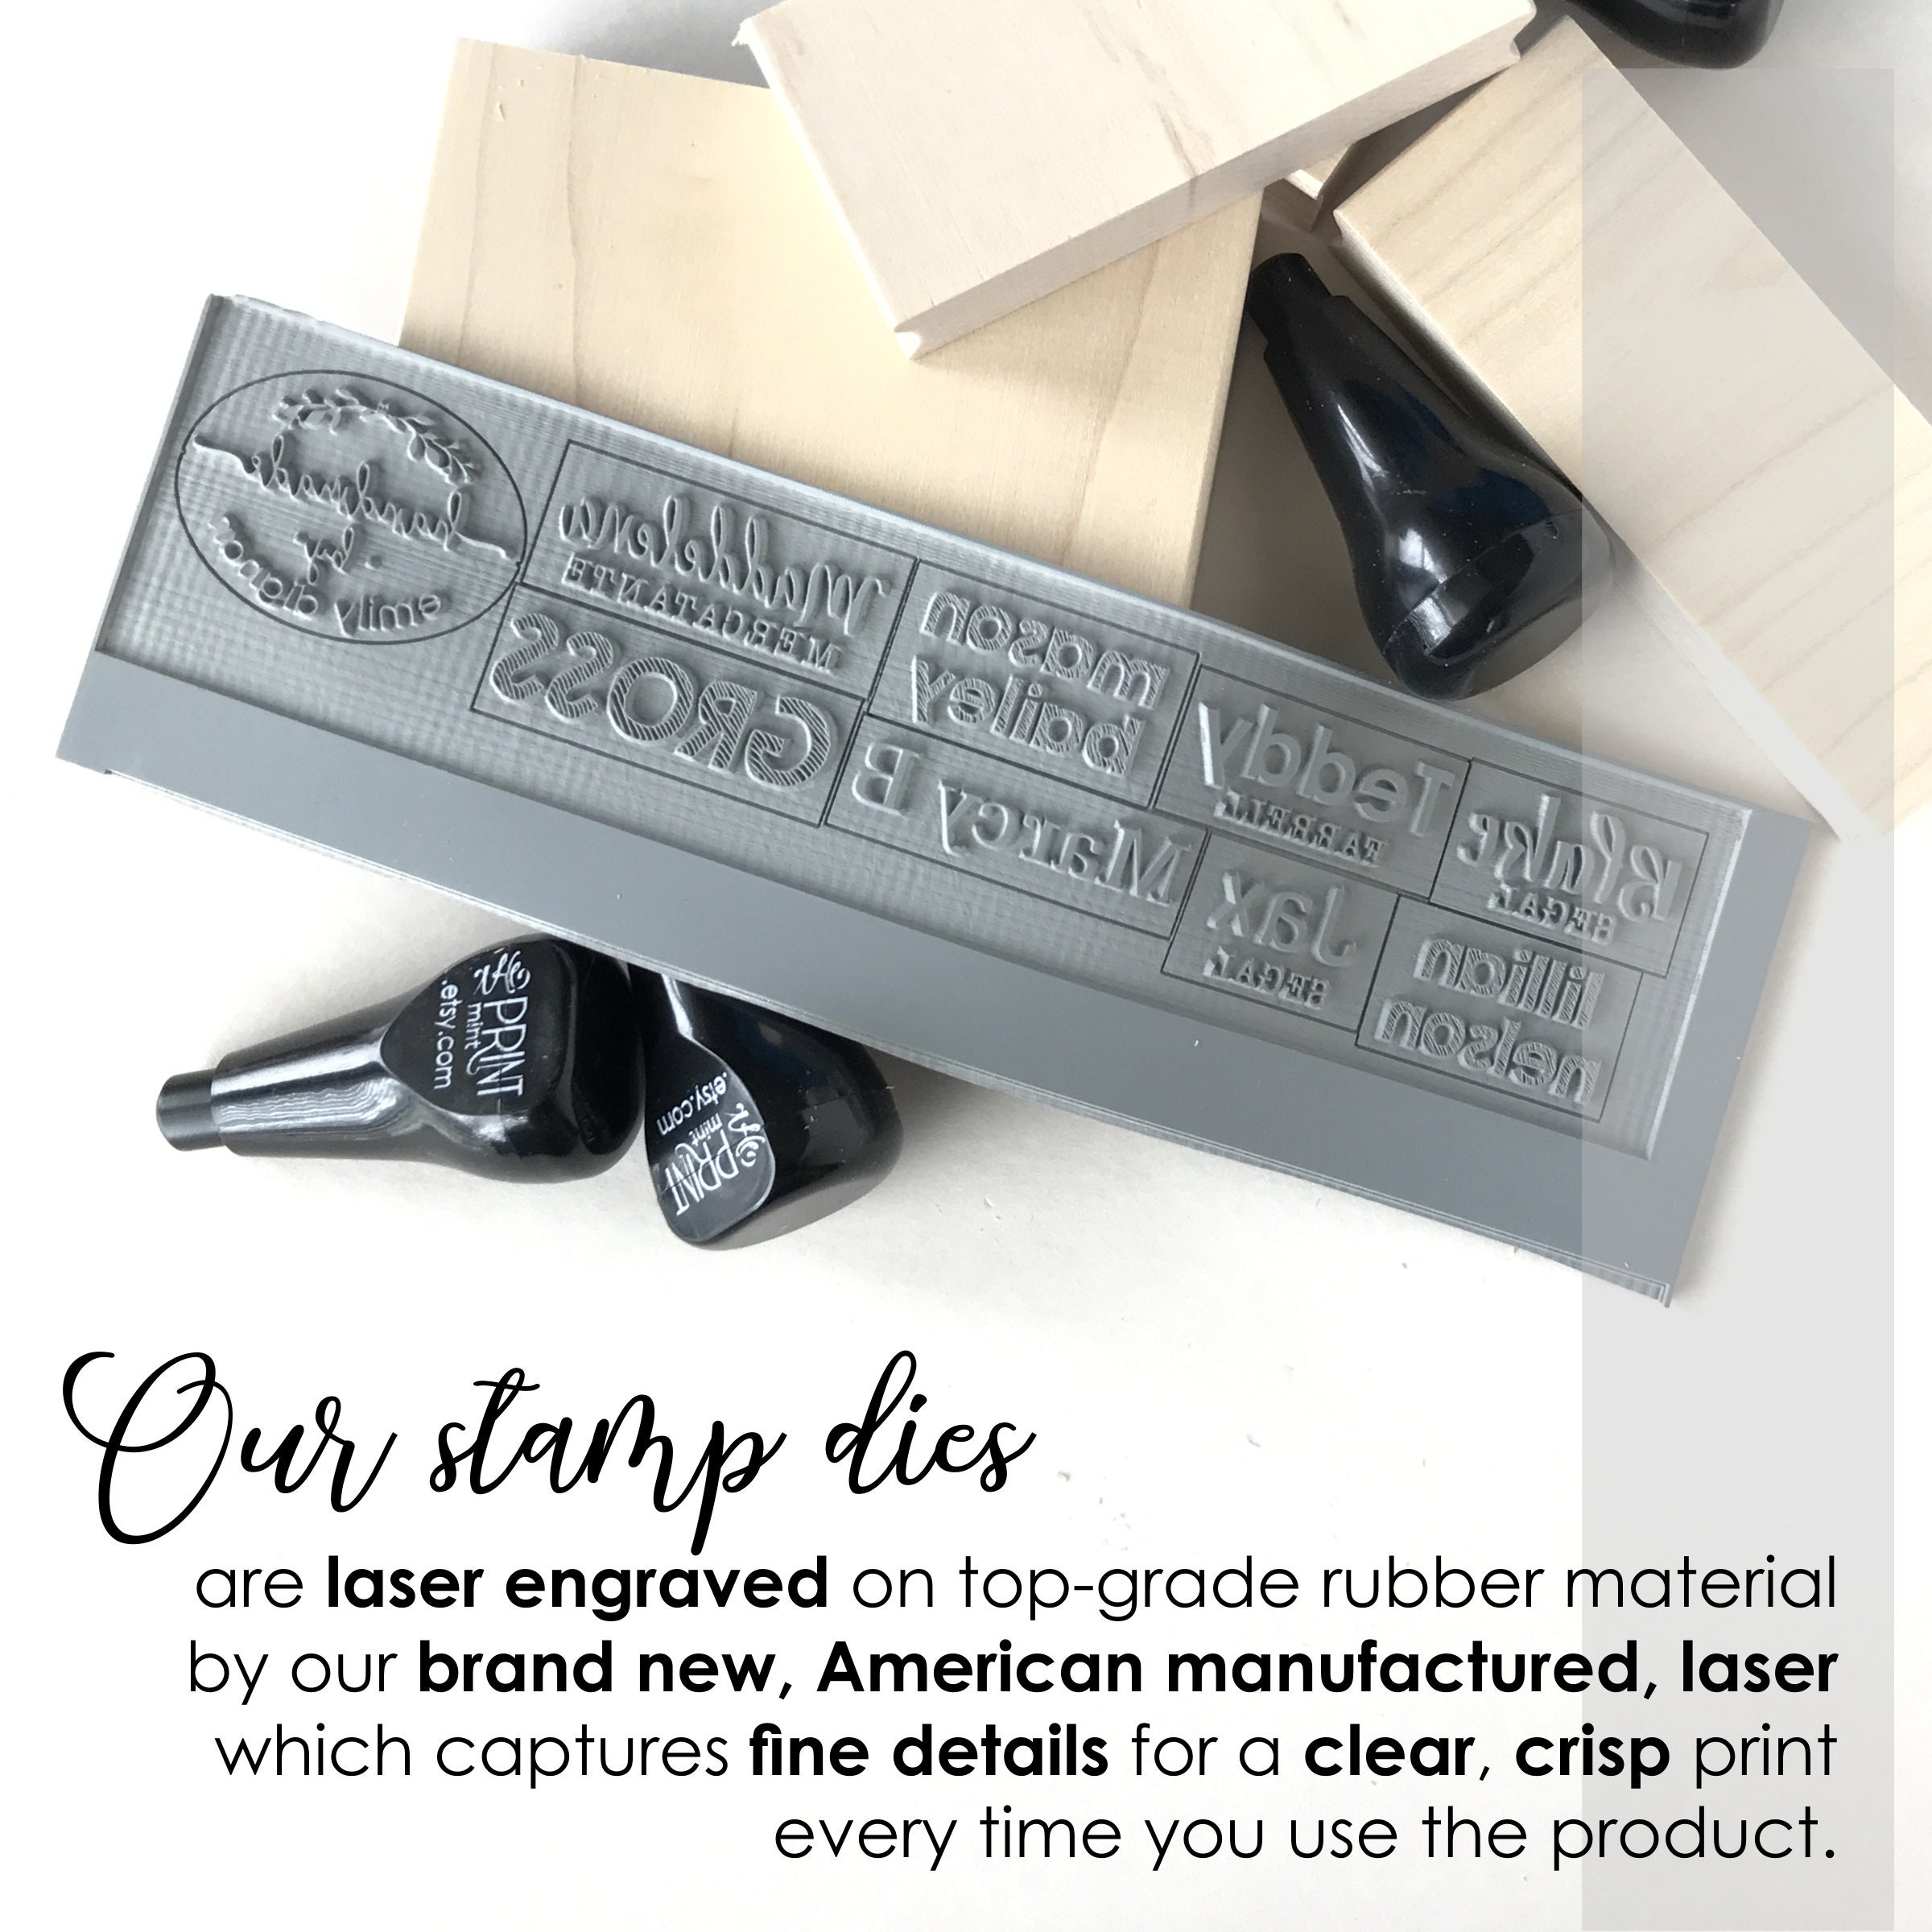 1Z9W15X IMPRINT360, Custom Signature Stamp (Personalized Name Stamp) -  Self-Inking Stamps are Perfect for Fast, Repetitive Stamping